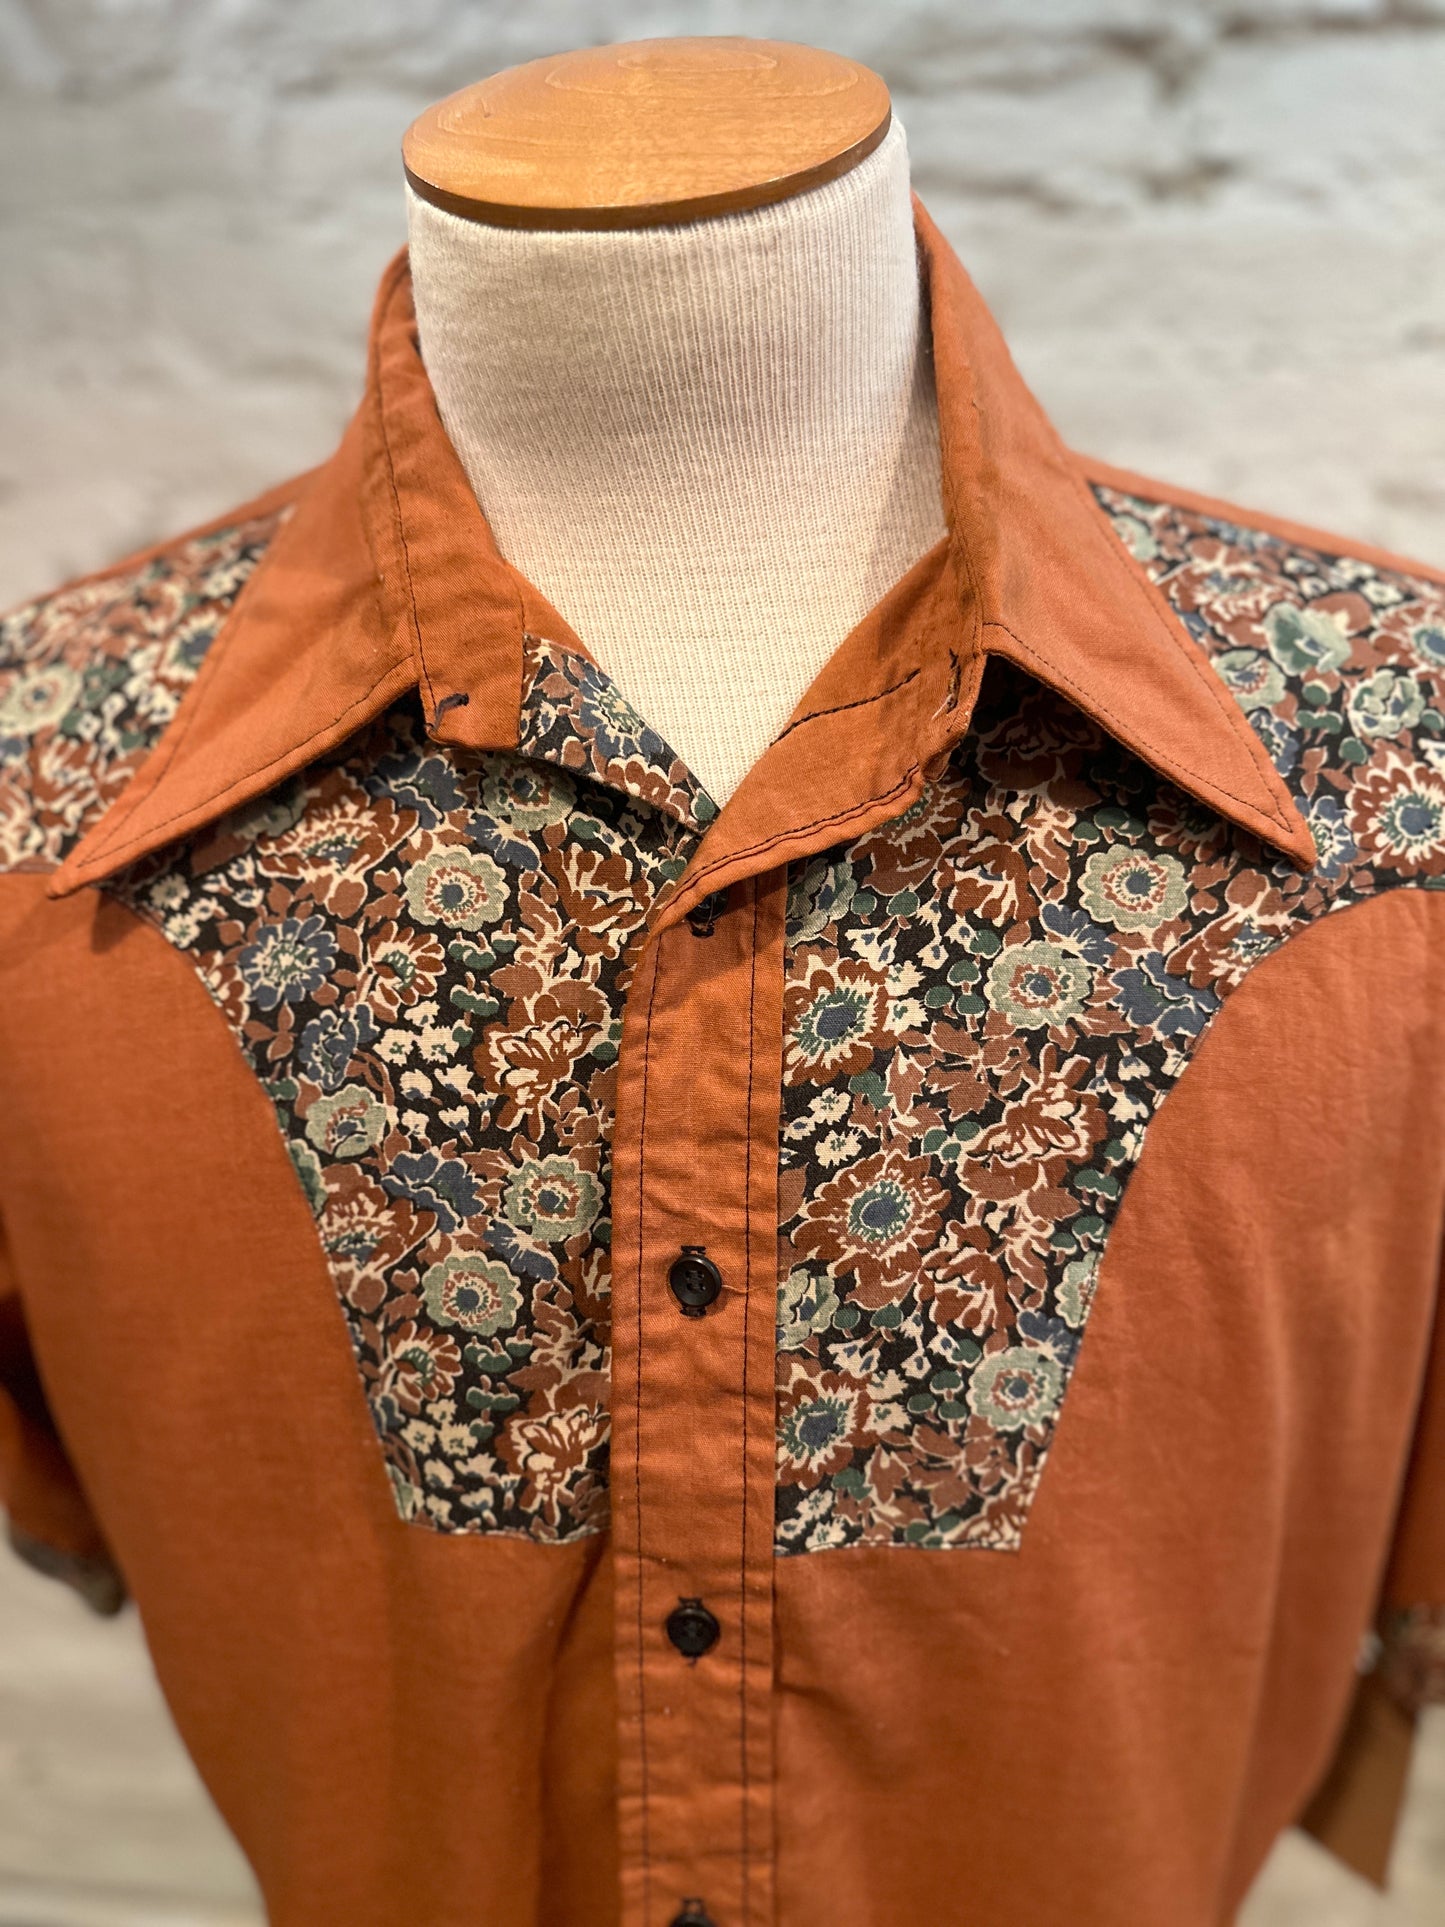 1970's Mens Button Up Shirt with Floral Accents